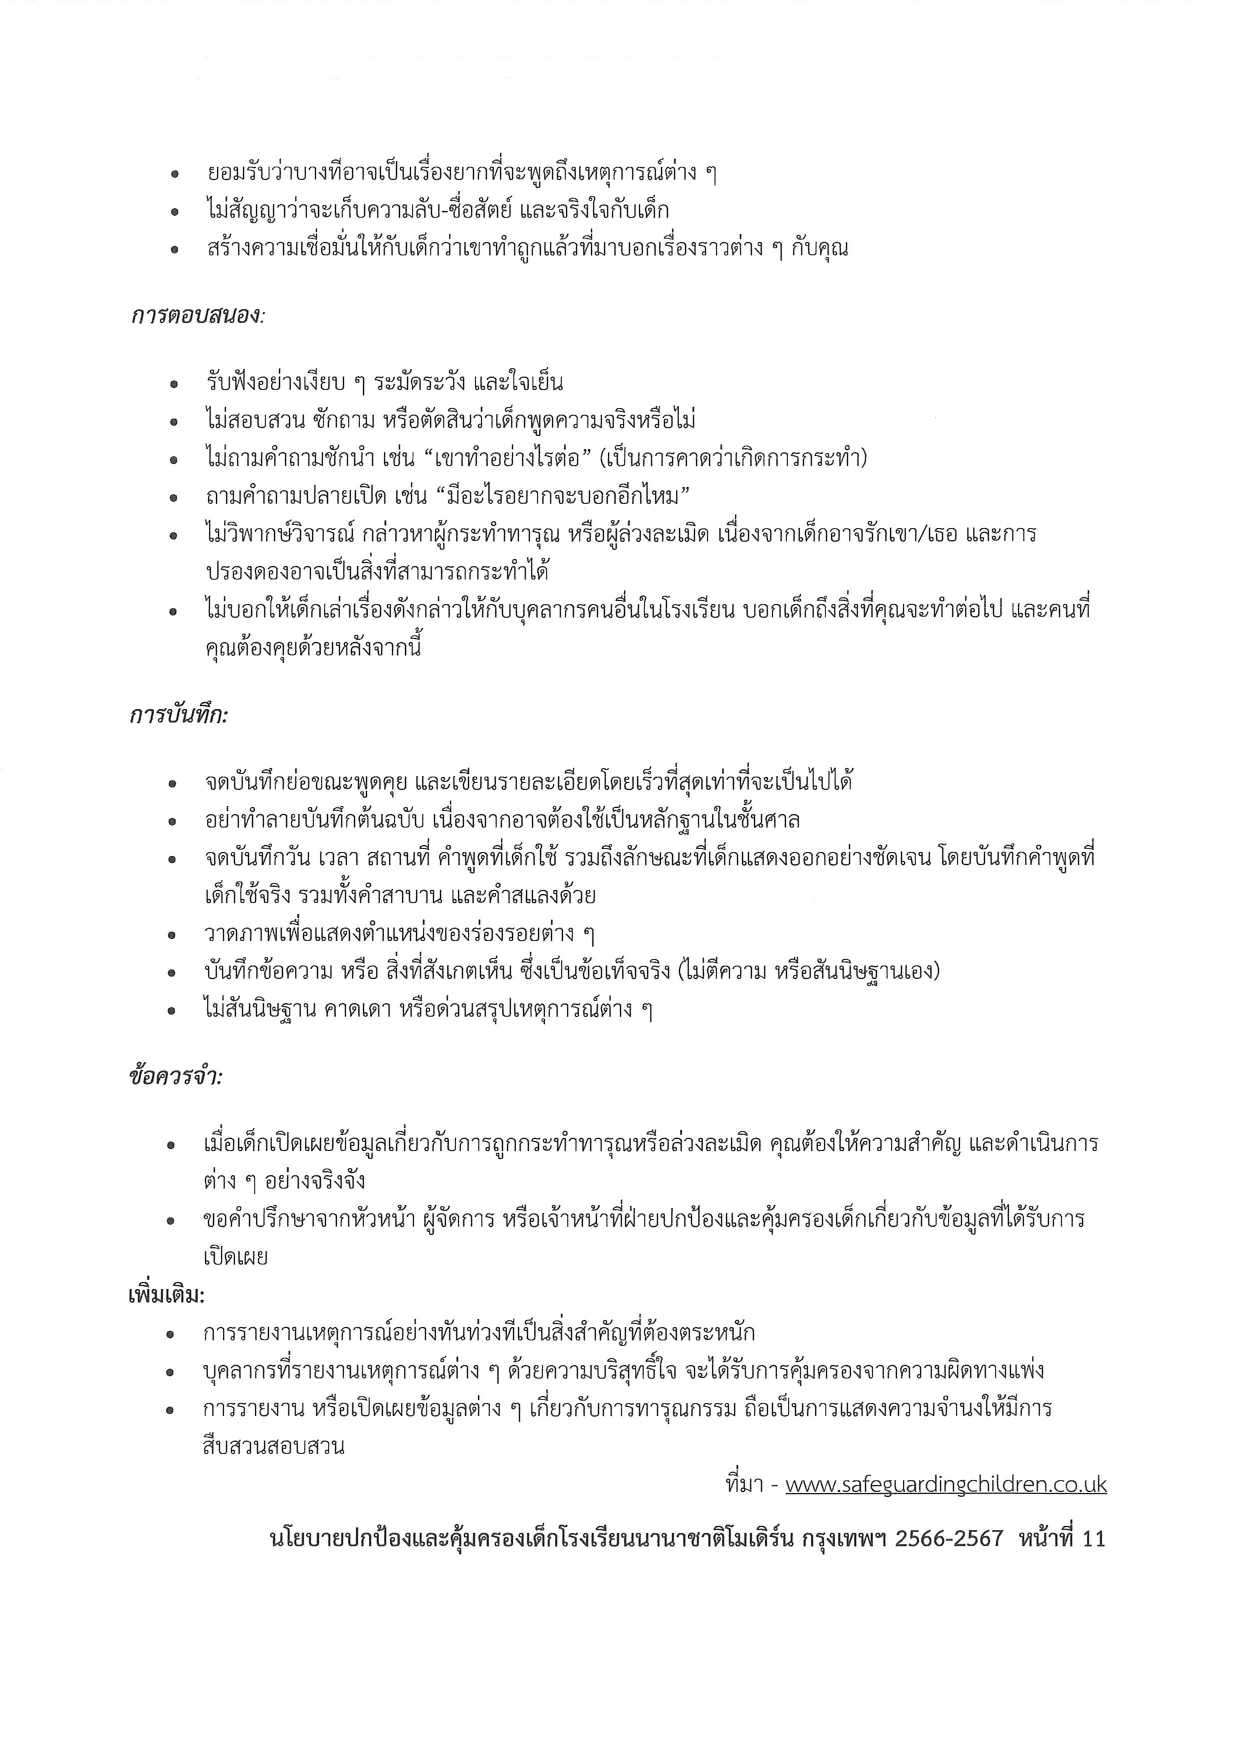 Child Protection Policy 2023 2024 Thai page 0011